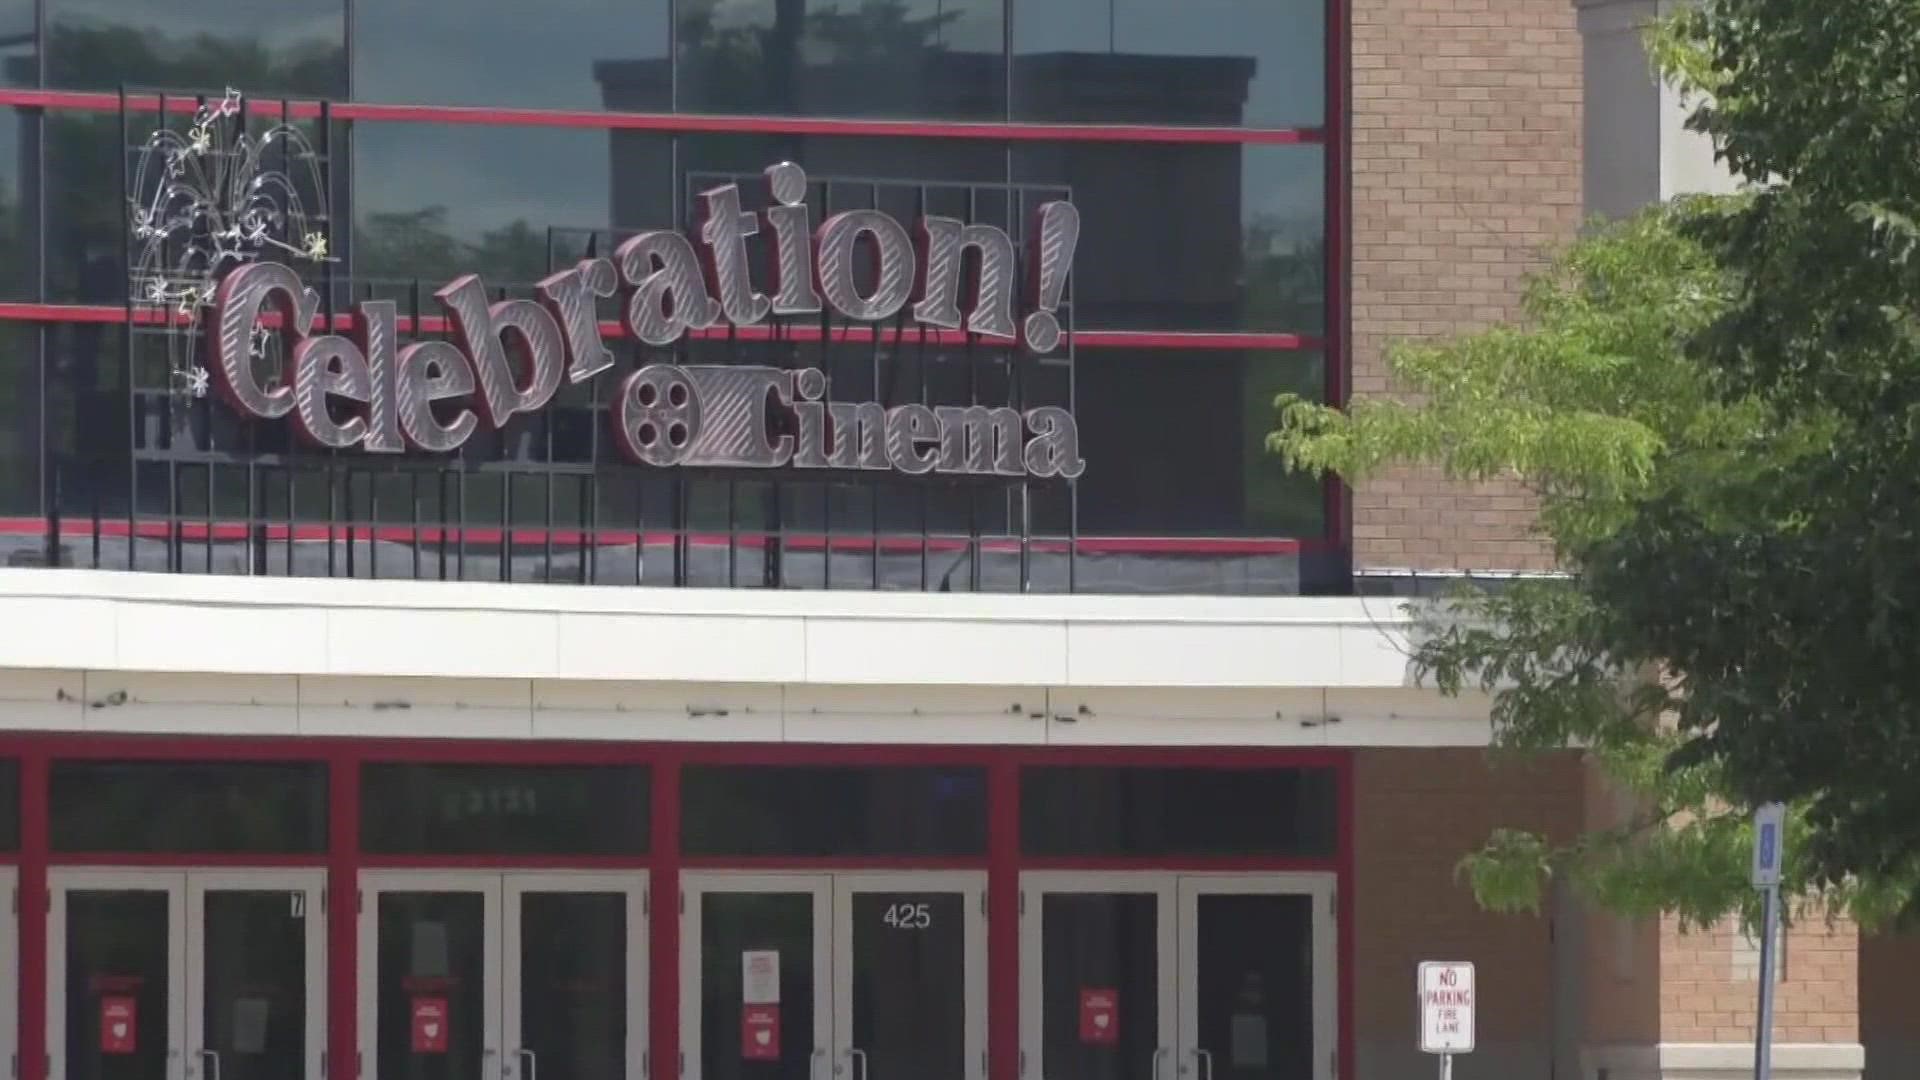 For the deaf and hard of hearing community, forms of entertainment can be harder to find. A local movie theater chain wants to help make that search easier.